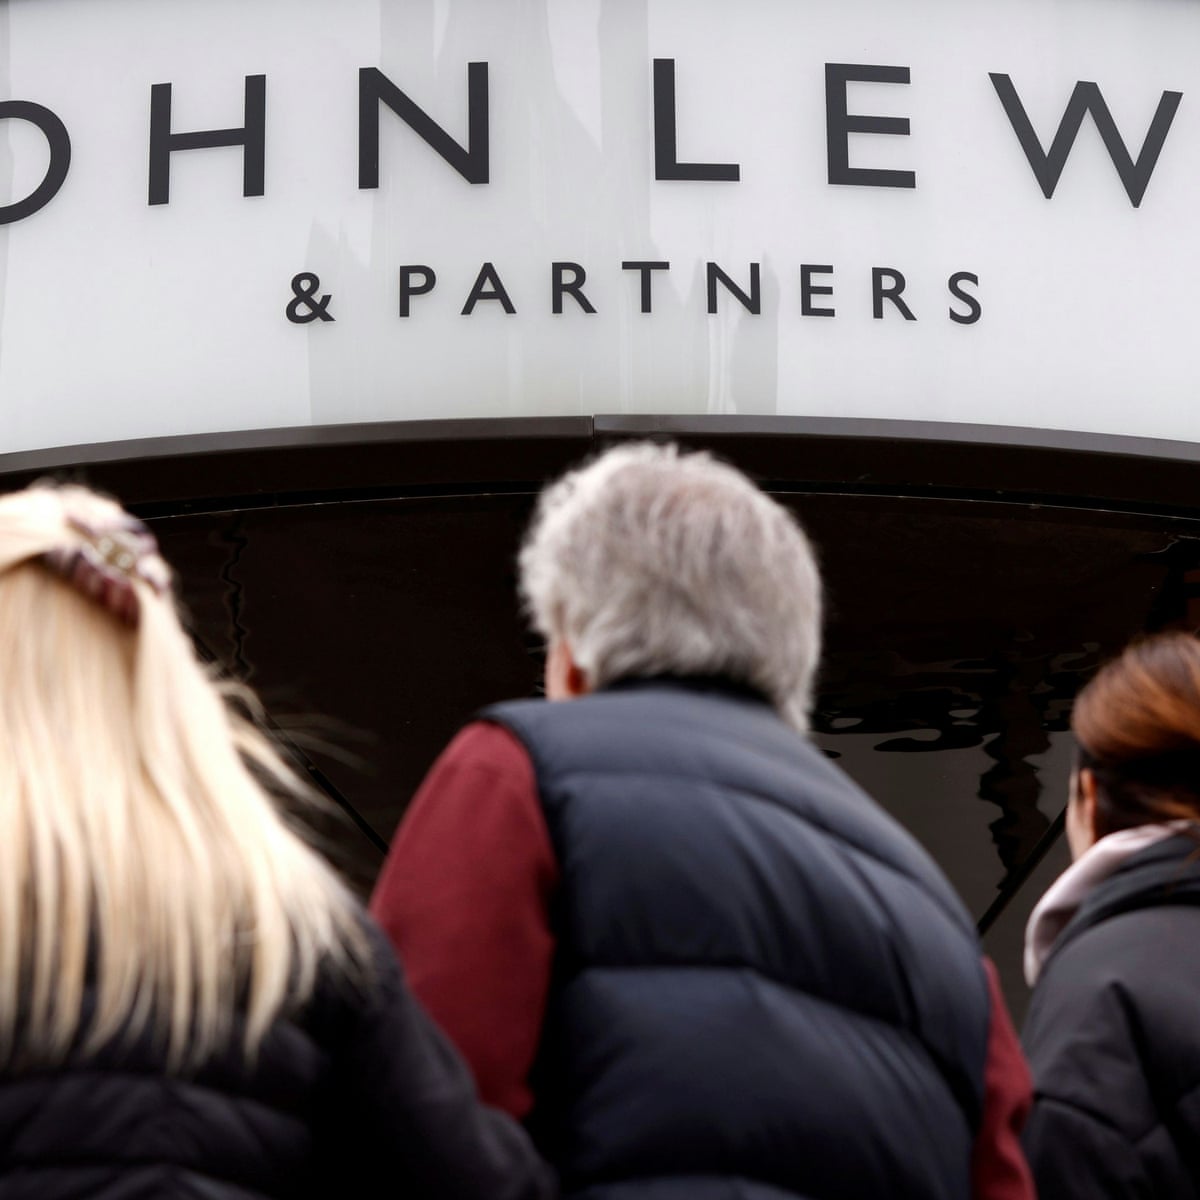 Sales of John Lewis slider slippers have doubled since lockdown